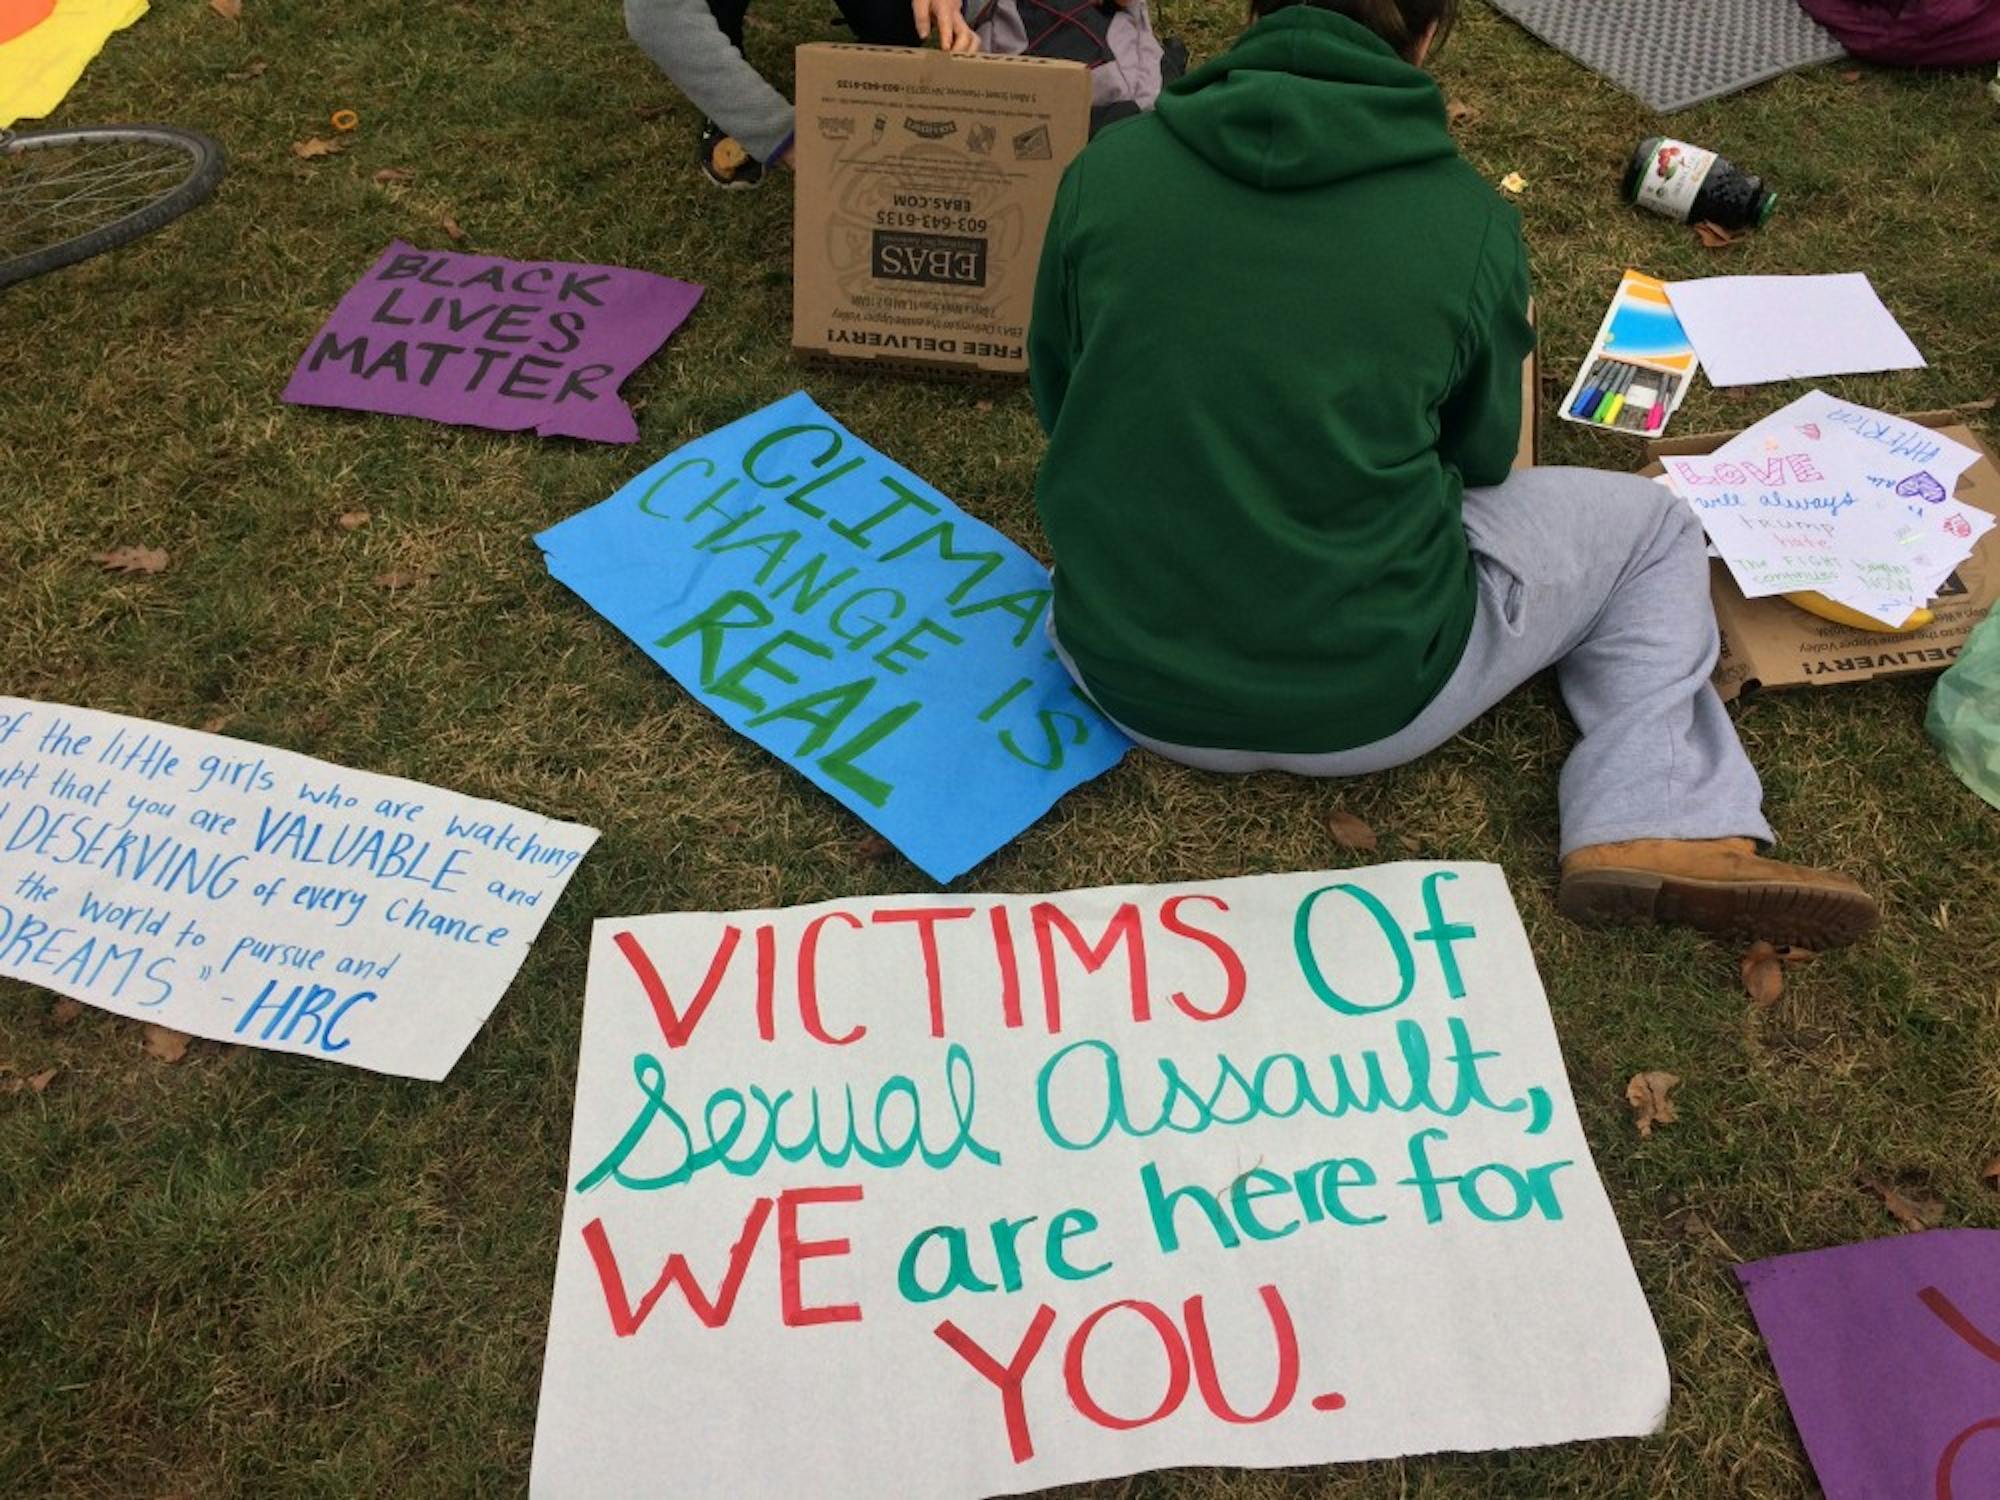 Signs displayed varying messages on social justice&nbsp;movements and self-care.